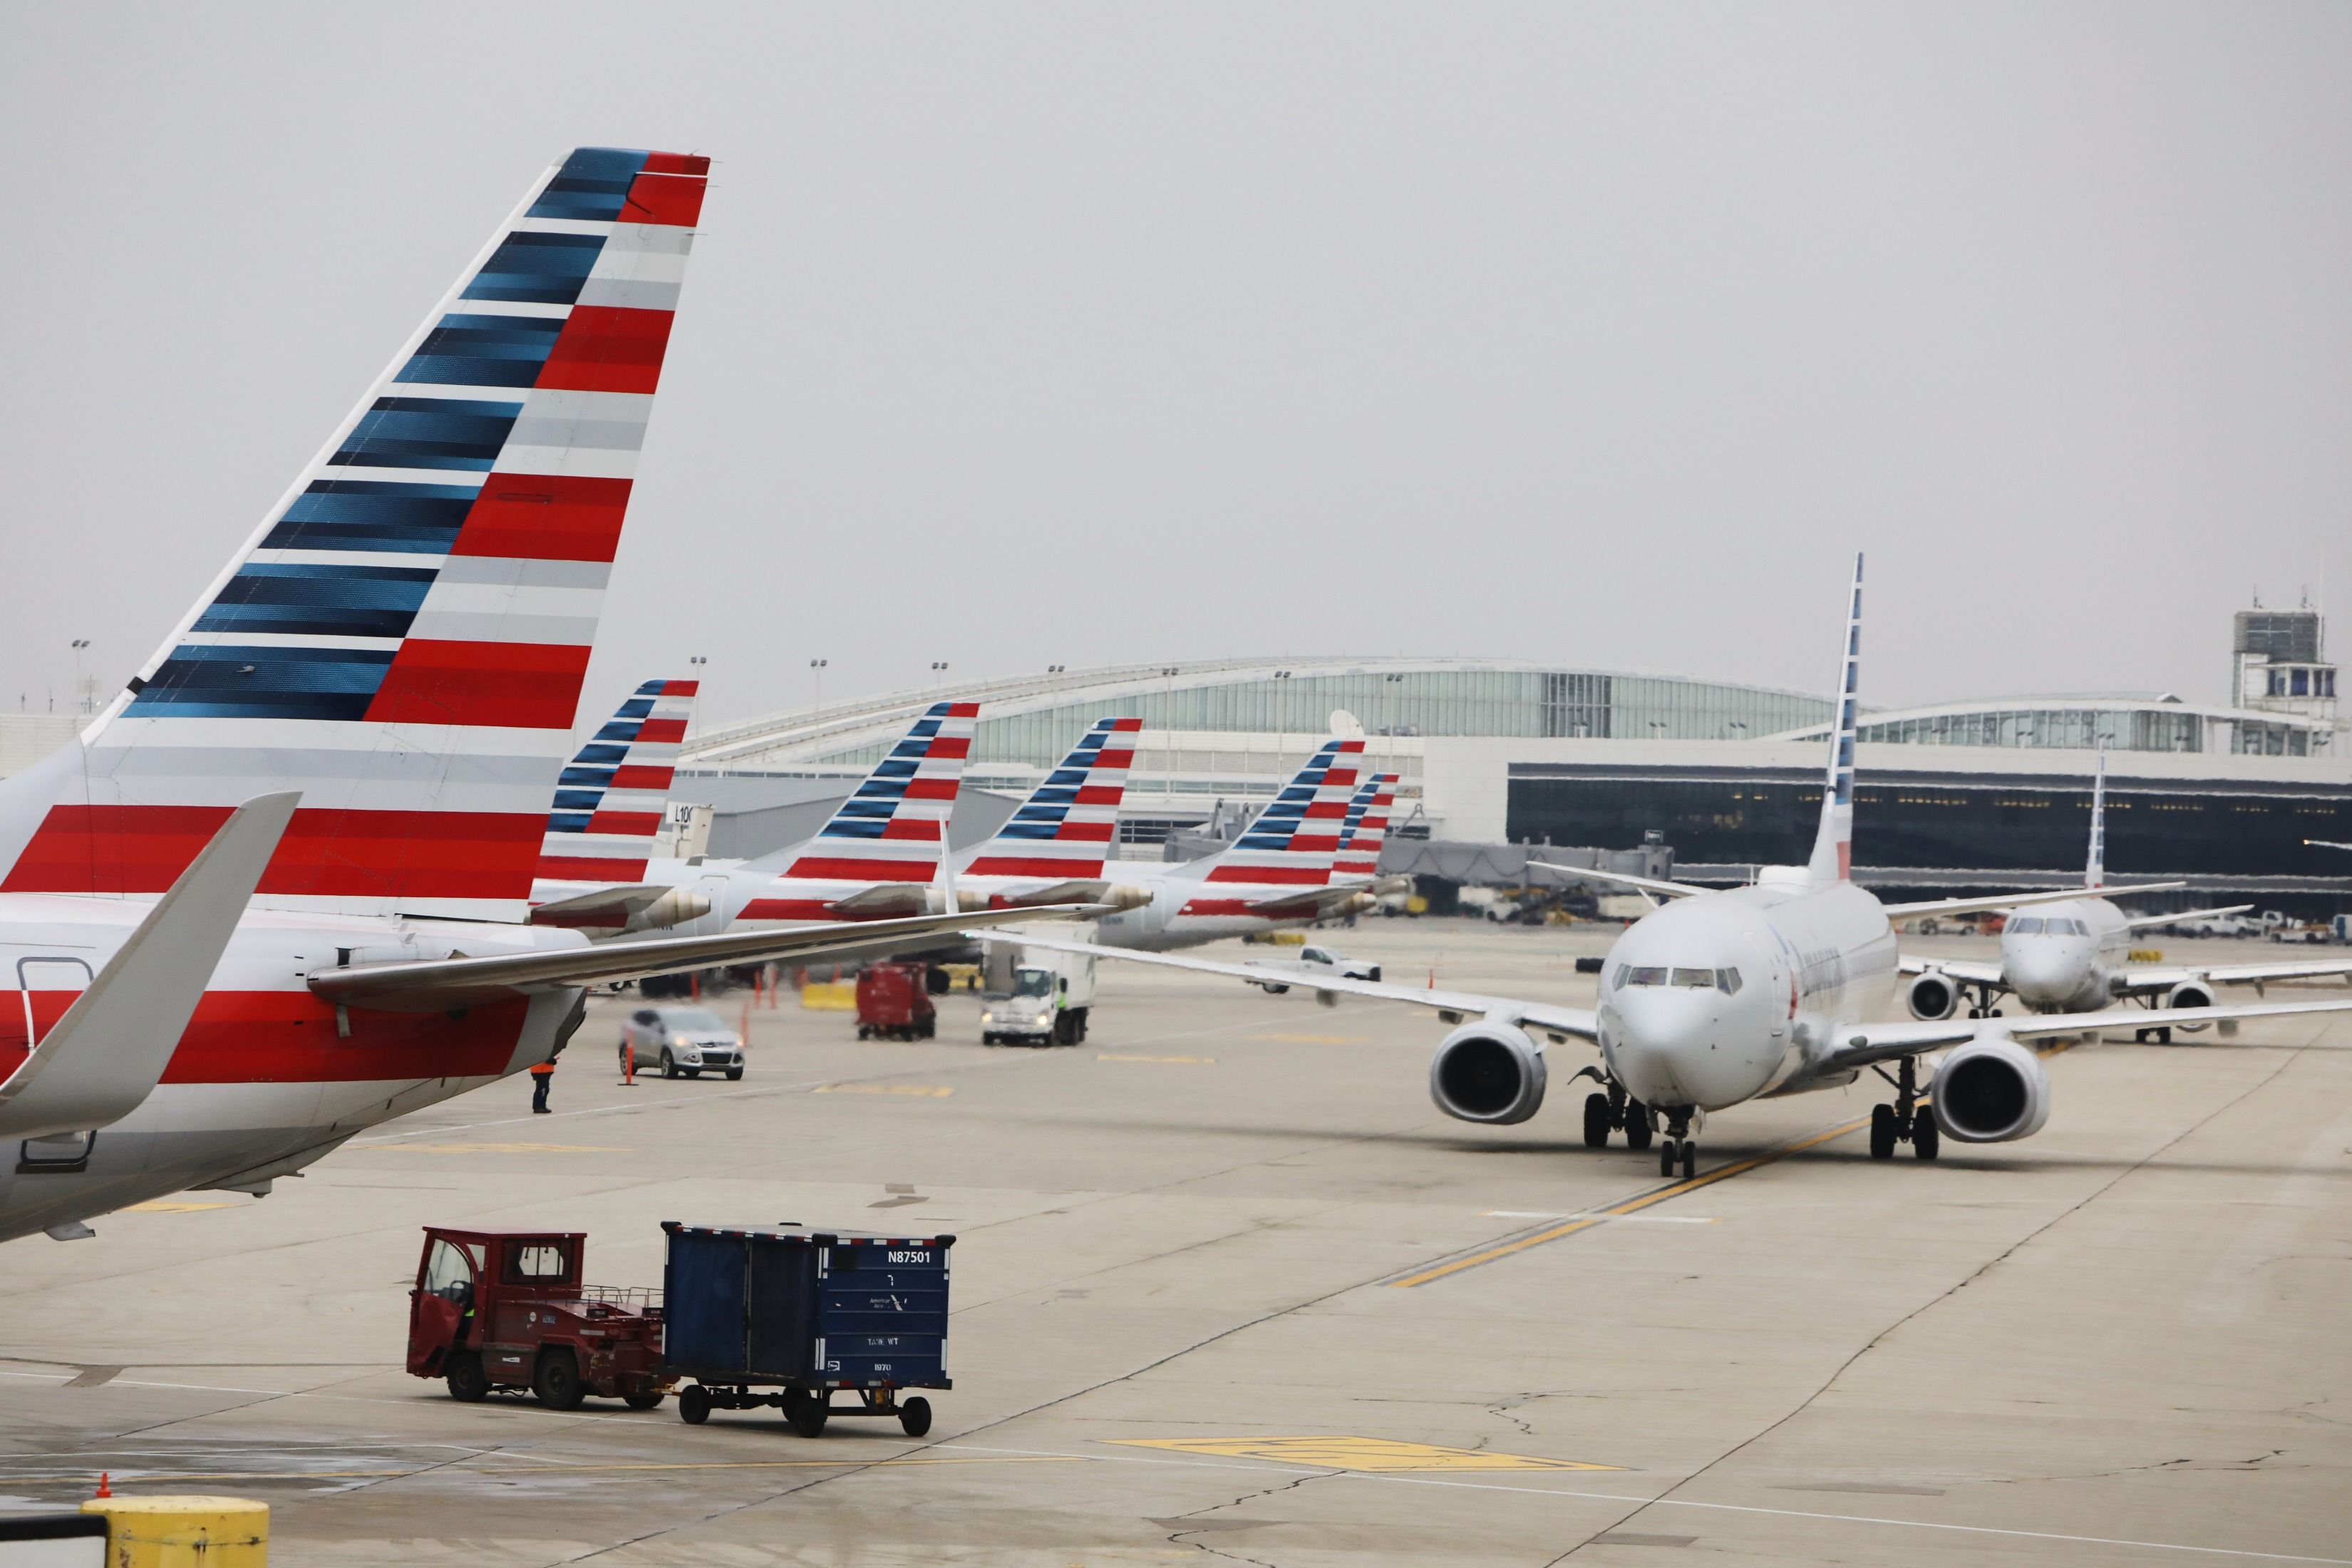 Several American Airlines aircraft parked at an airport.